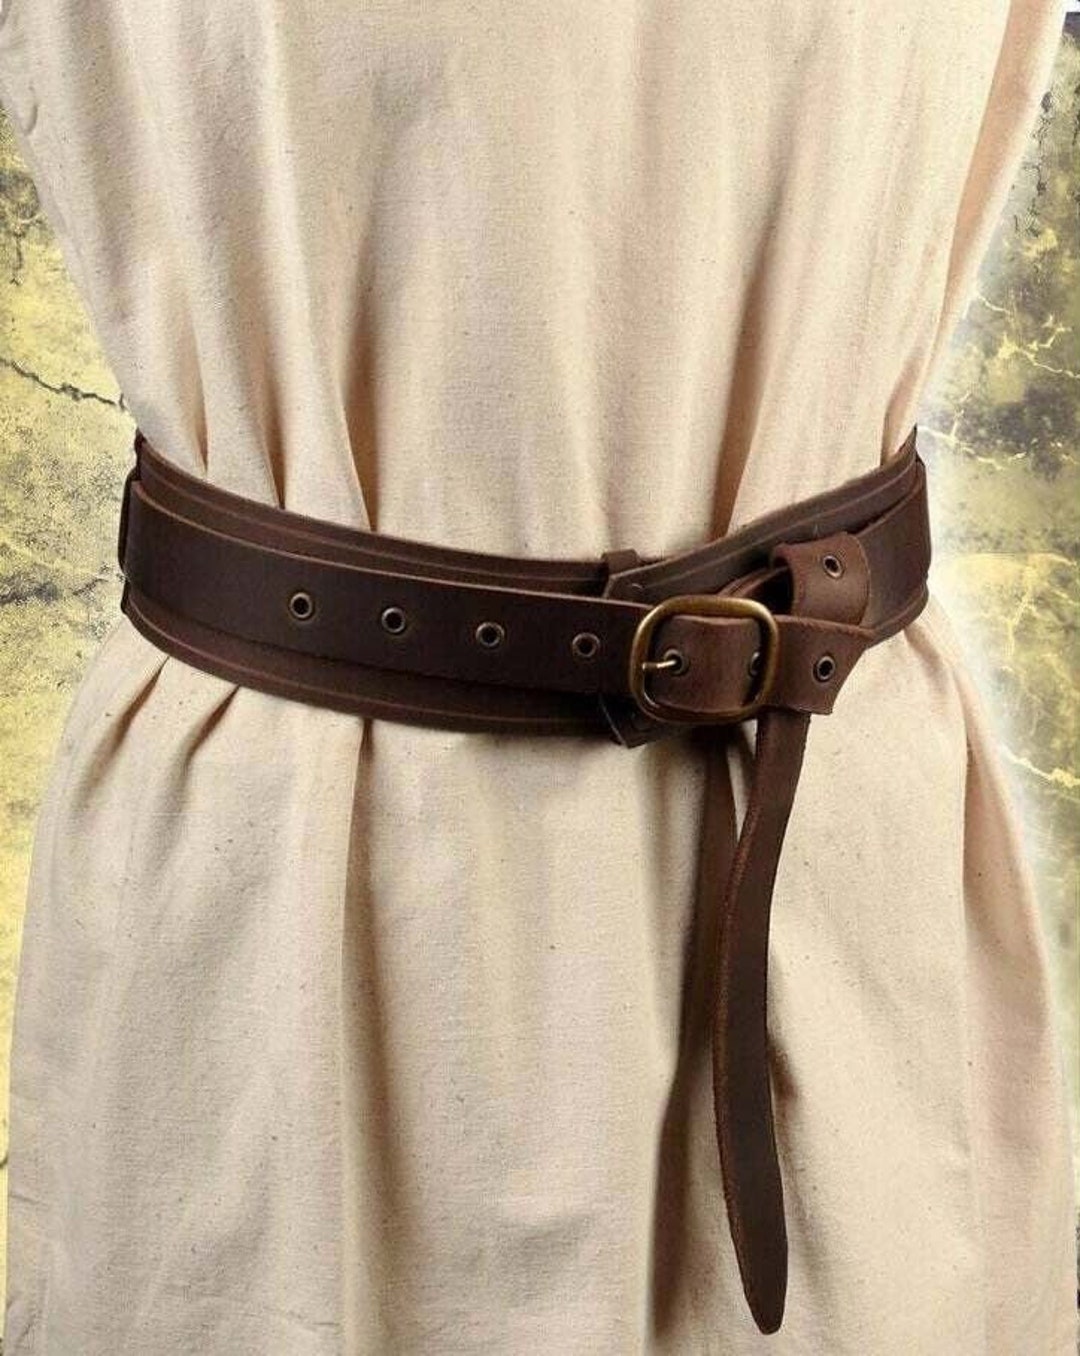 Adventurer's Belt Leather Armor for LARP and Cosplay-lo - Etsy